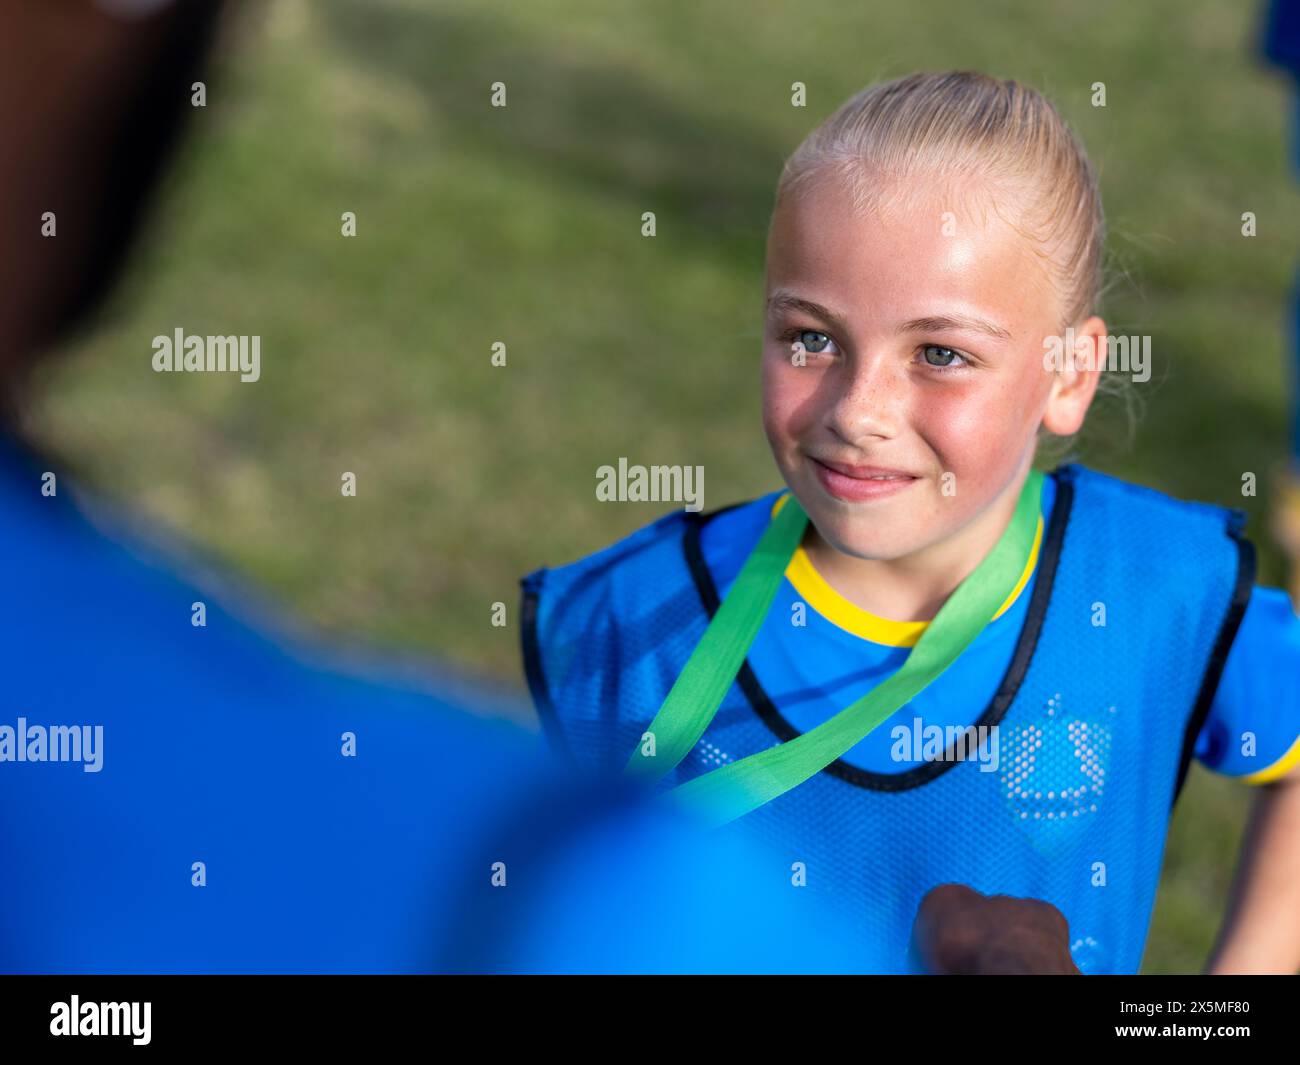 Girl (8-9) in soccer uniform receiving medal from coach Stock Photo